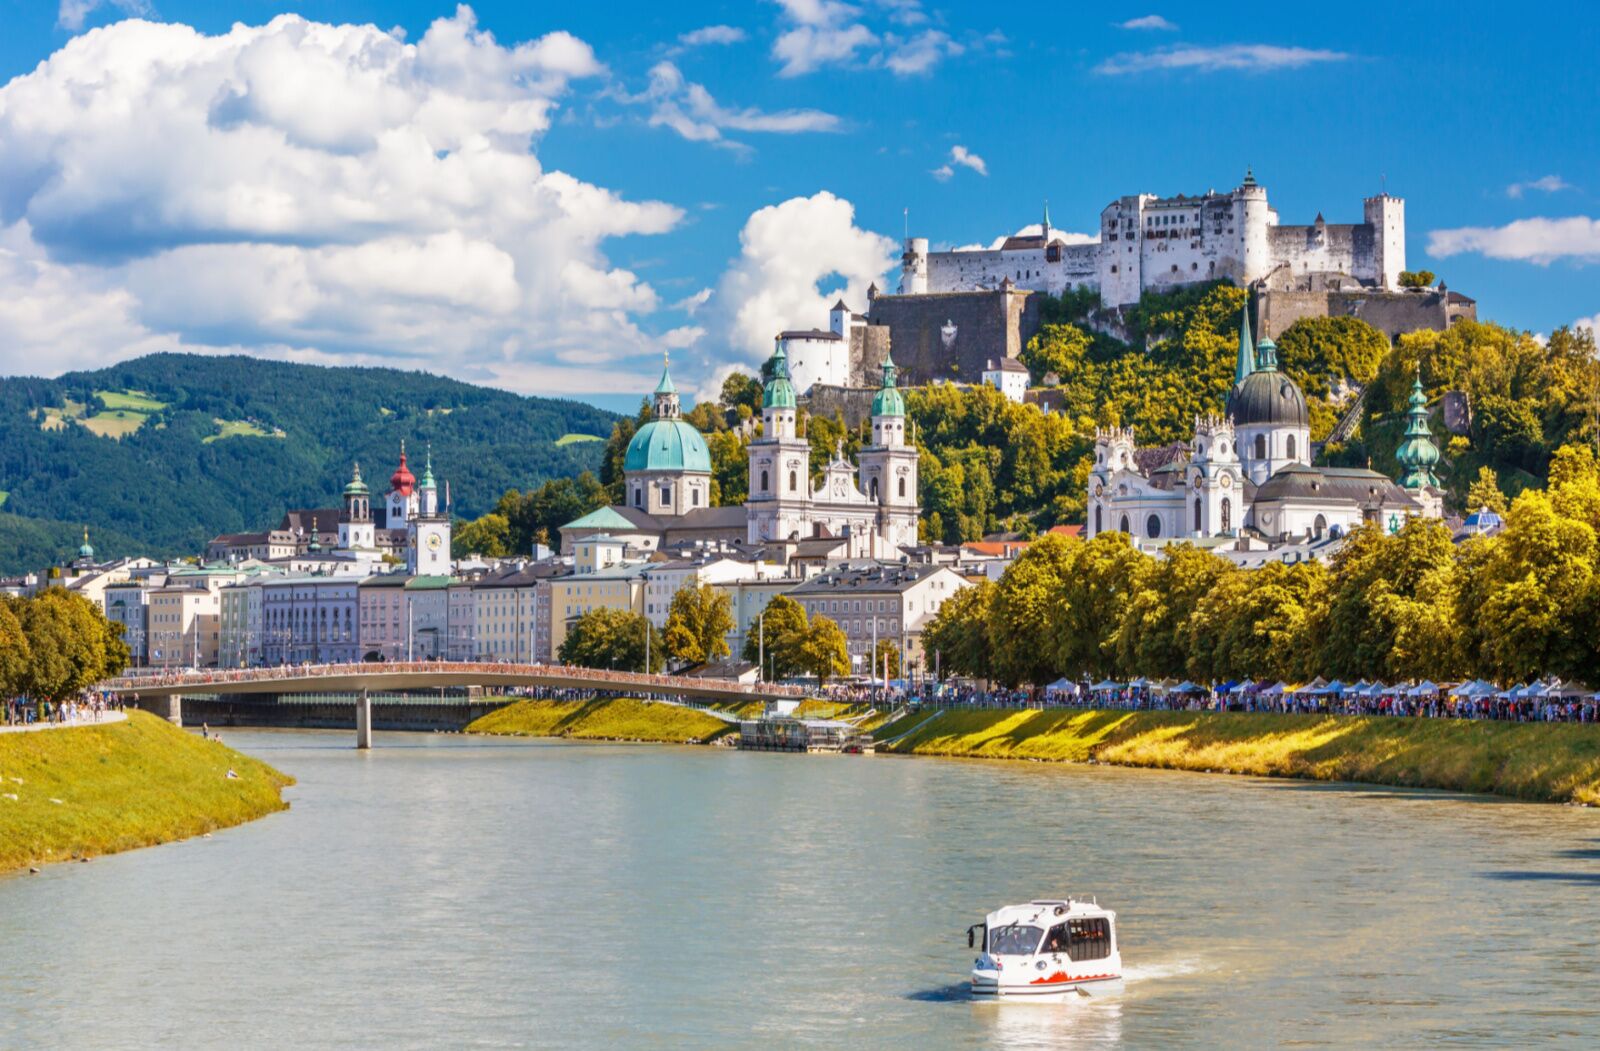 10 Inexpensive Things To Do in Salzburg, Austria for Budget Travelers